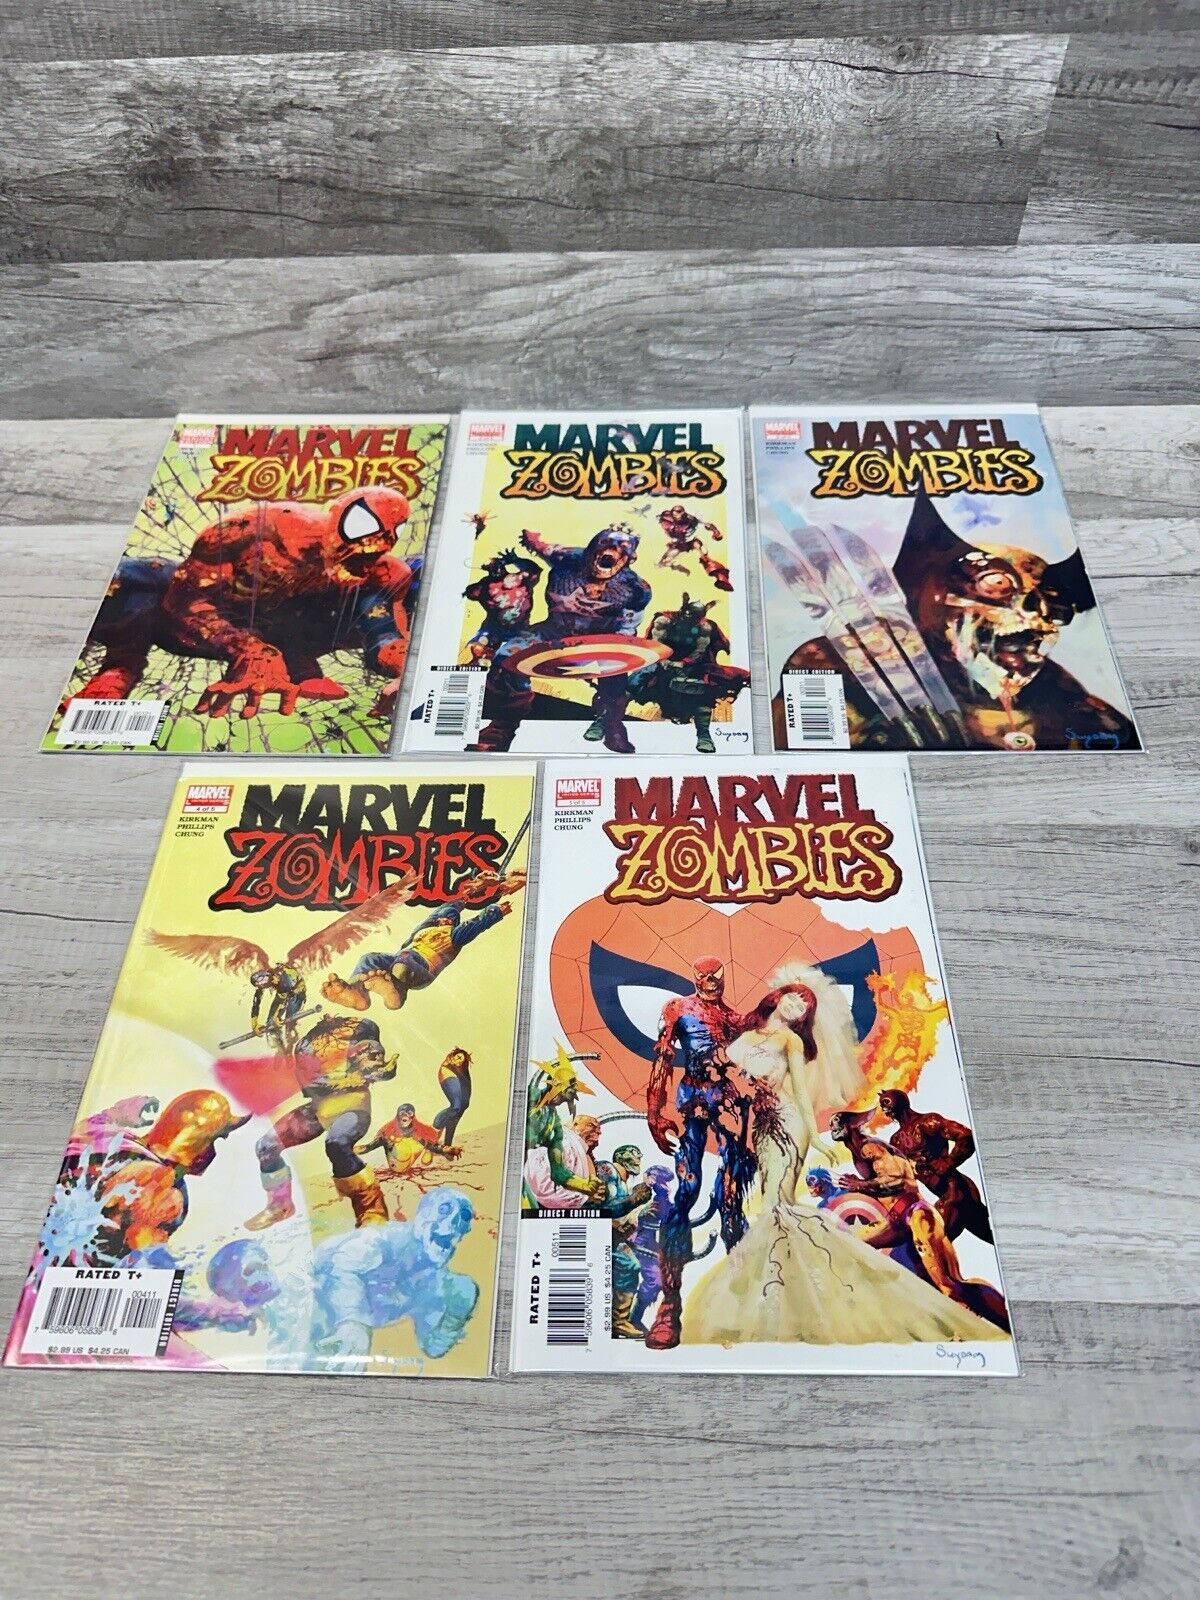 Marvel Zombies 1-5 w/ Variant Cover 2006 Kirkman Philips Chung Limited Series